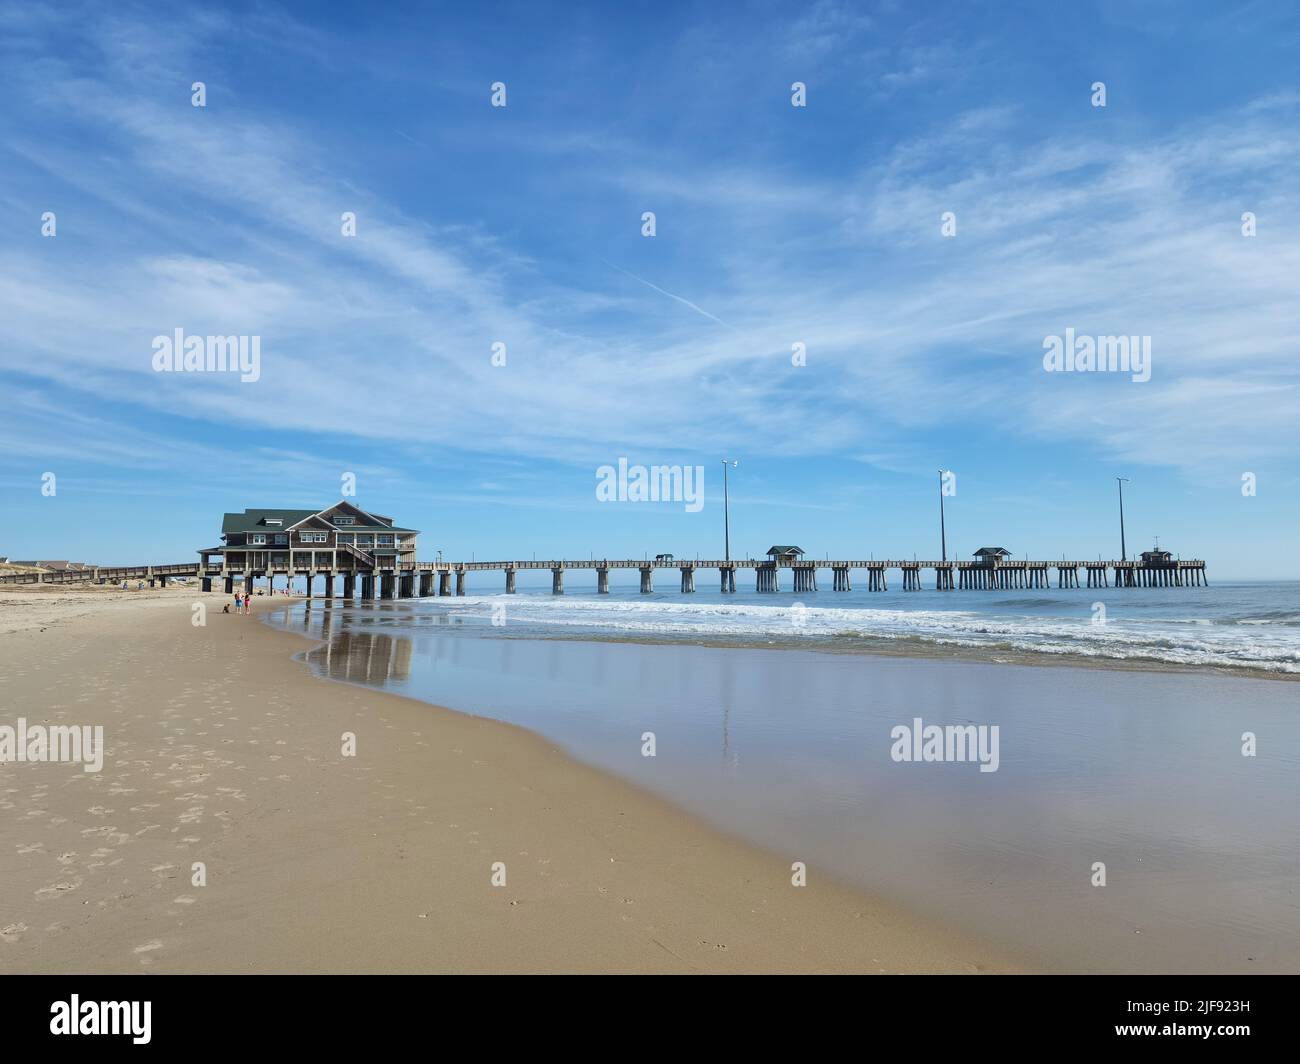 People on Nags Head Beach with the fishing pier, Jennette's Pier in the background. Photographed in Outer Banks, North Carolina. Image has copy space. Stock Photo